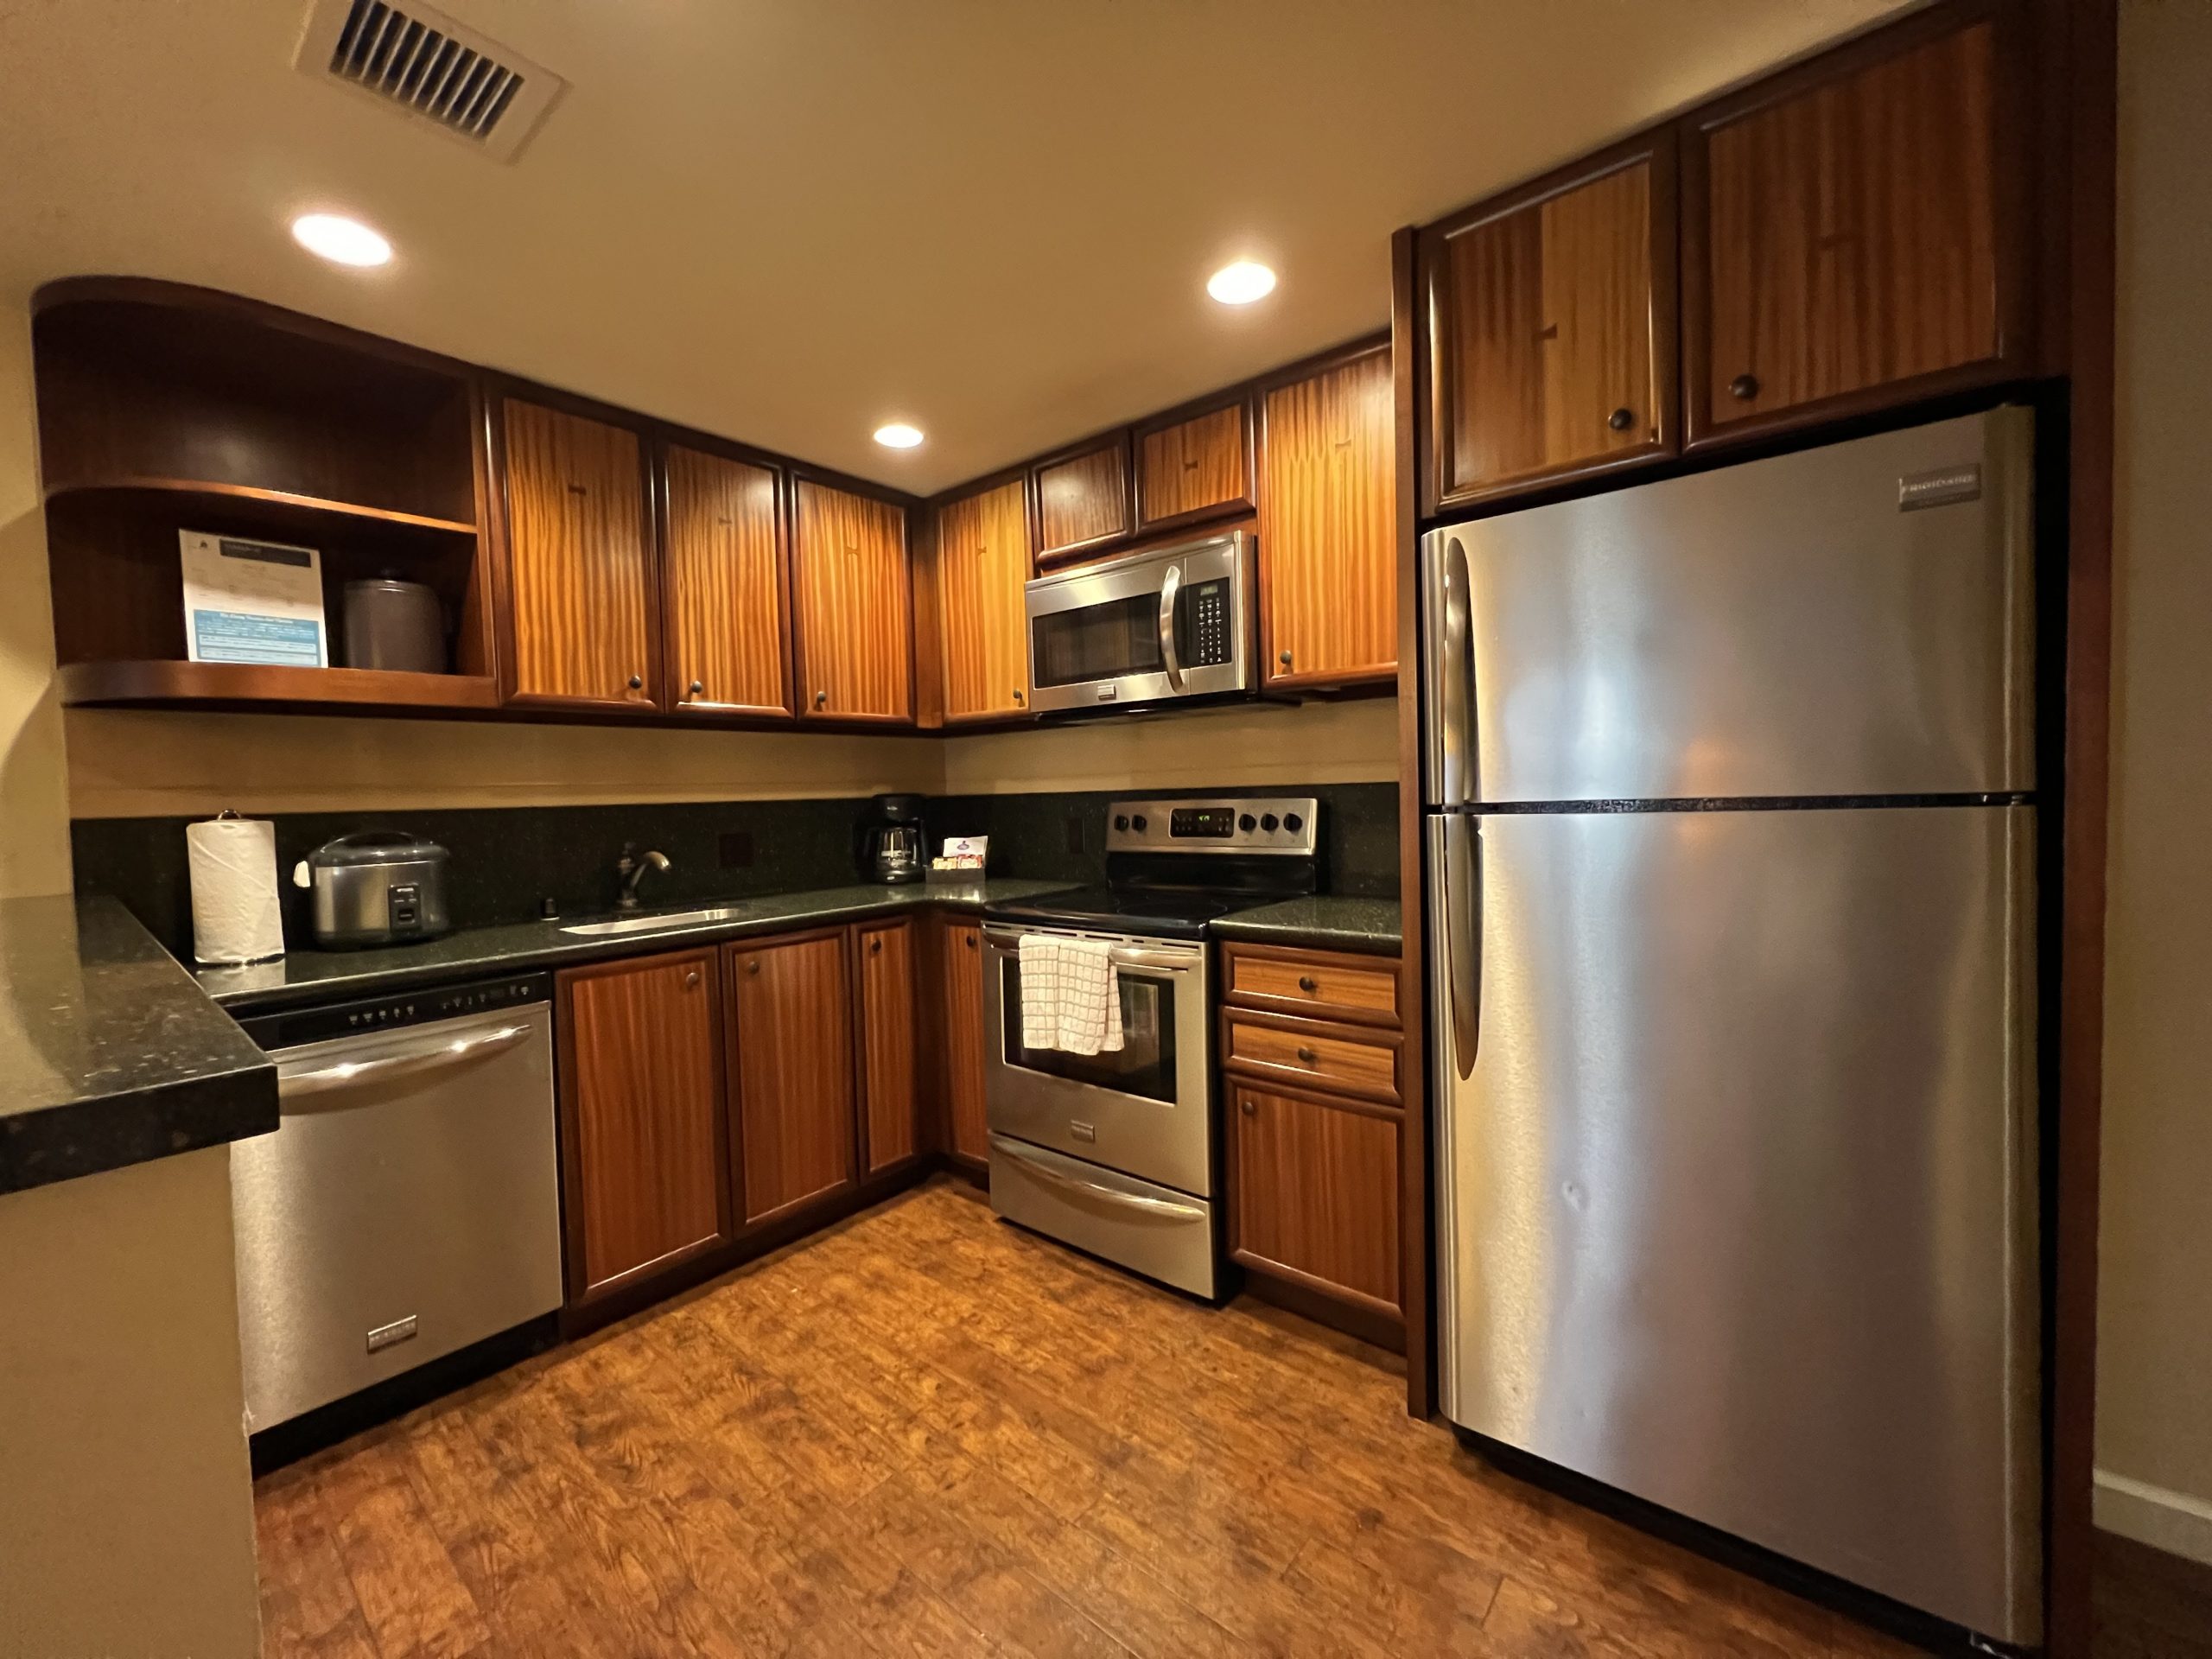 a kitchen with wood cabinets and stainless steel appliances